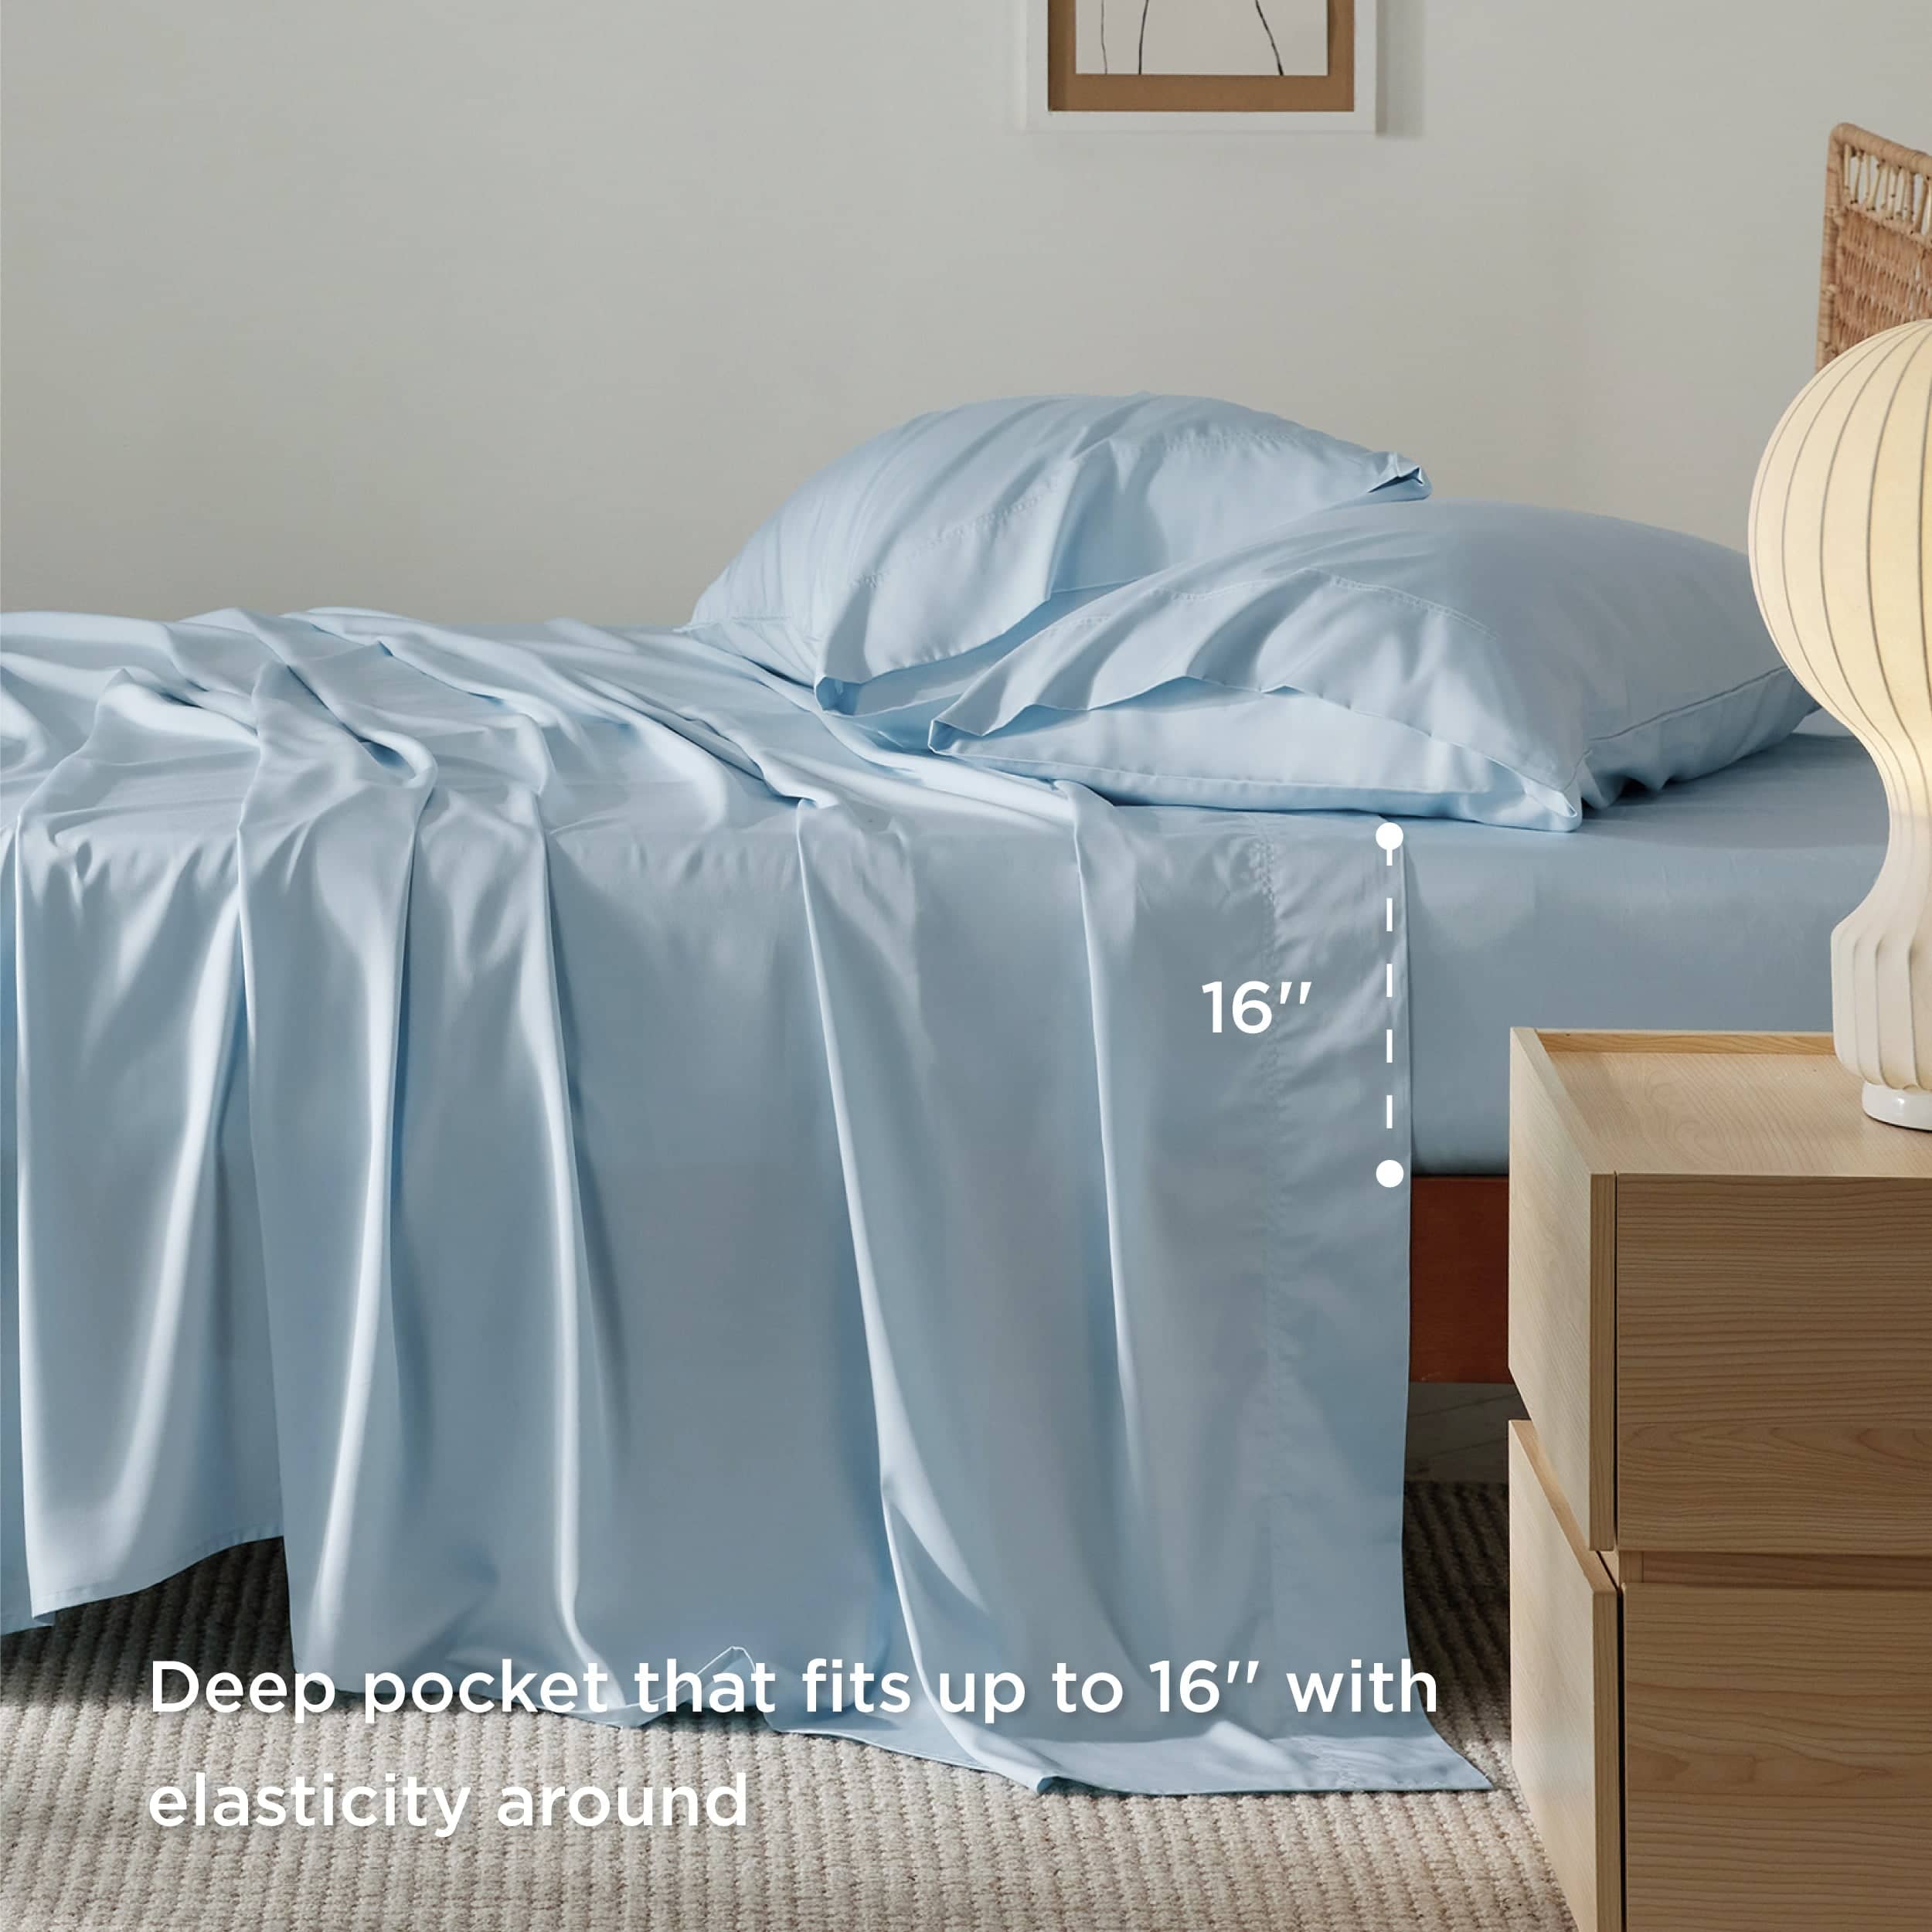 Bedsure King Fitted Sheet Only - Bed Sheets Extra Deep Pocket 16 inch, Ultra Soft Bottom Sheet for King Size Bed, White, 78 x 8